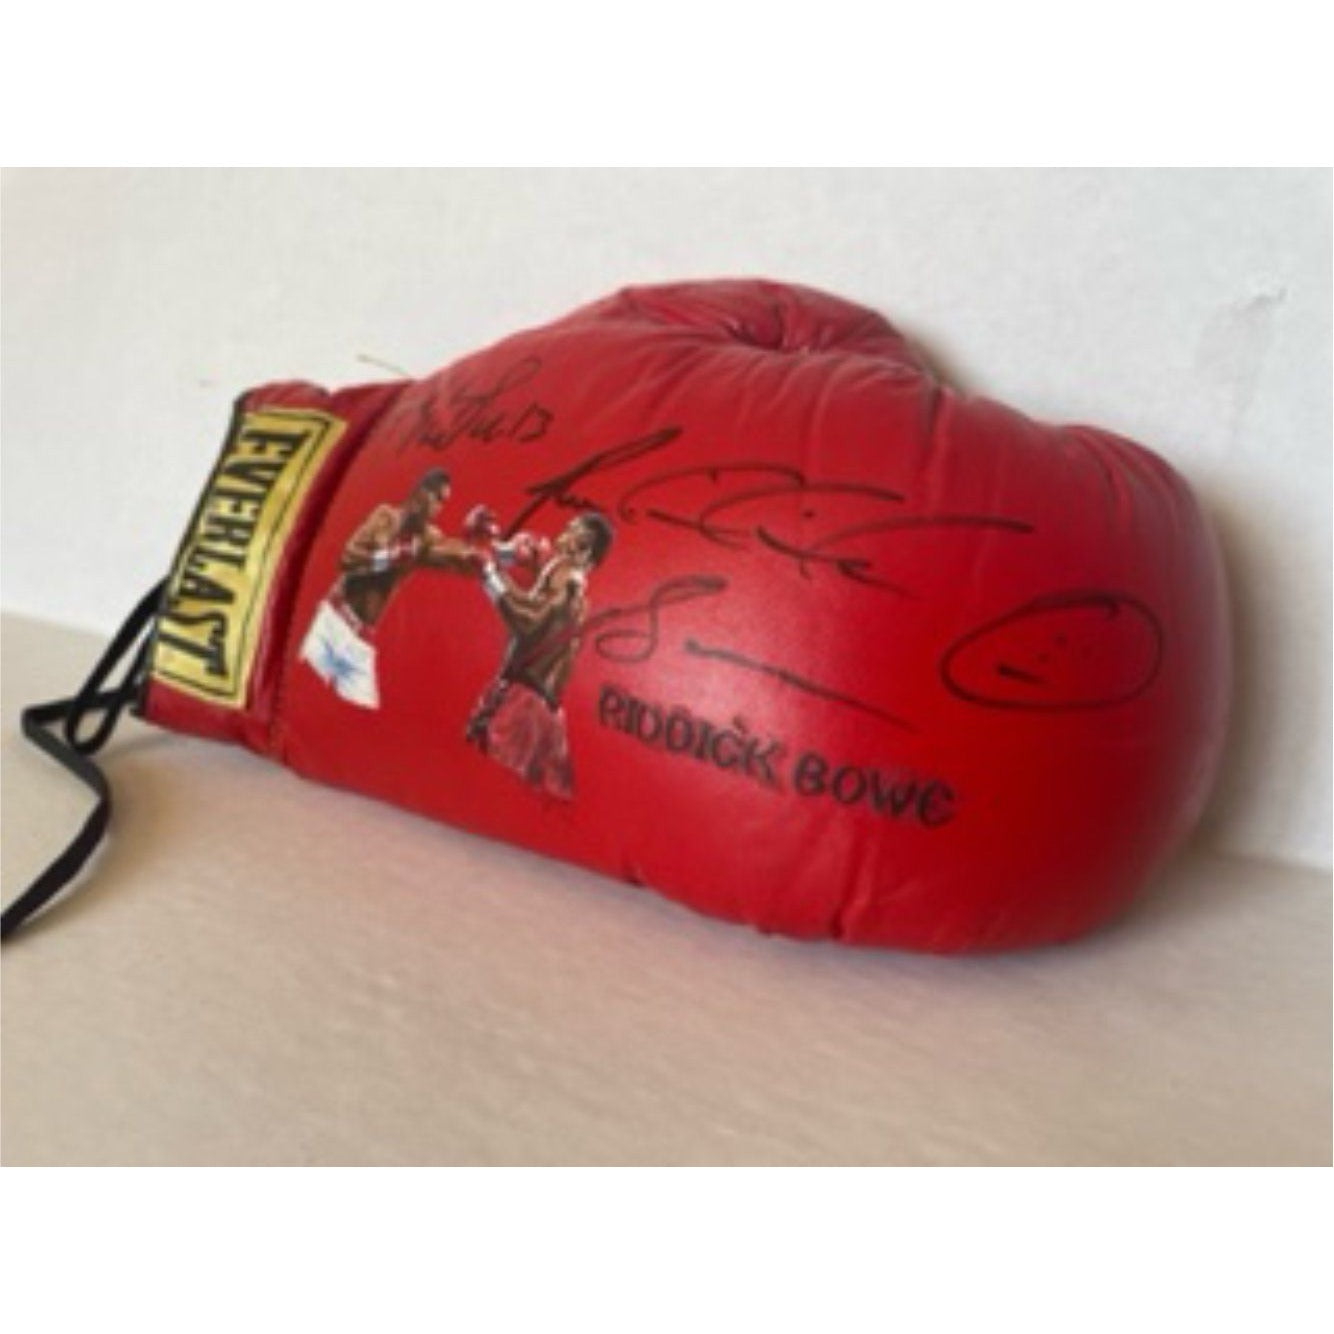 Evander Holyfield Riddick Bowe hand-painted leather Everlast boxing glove signed with proof